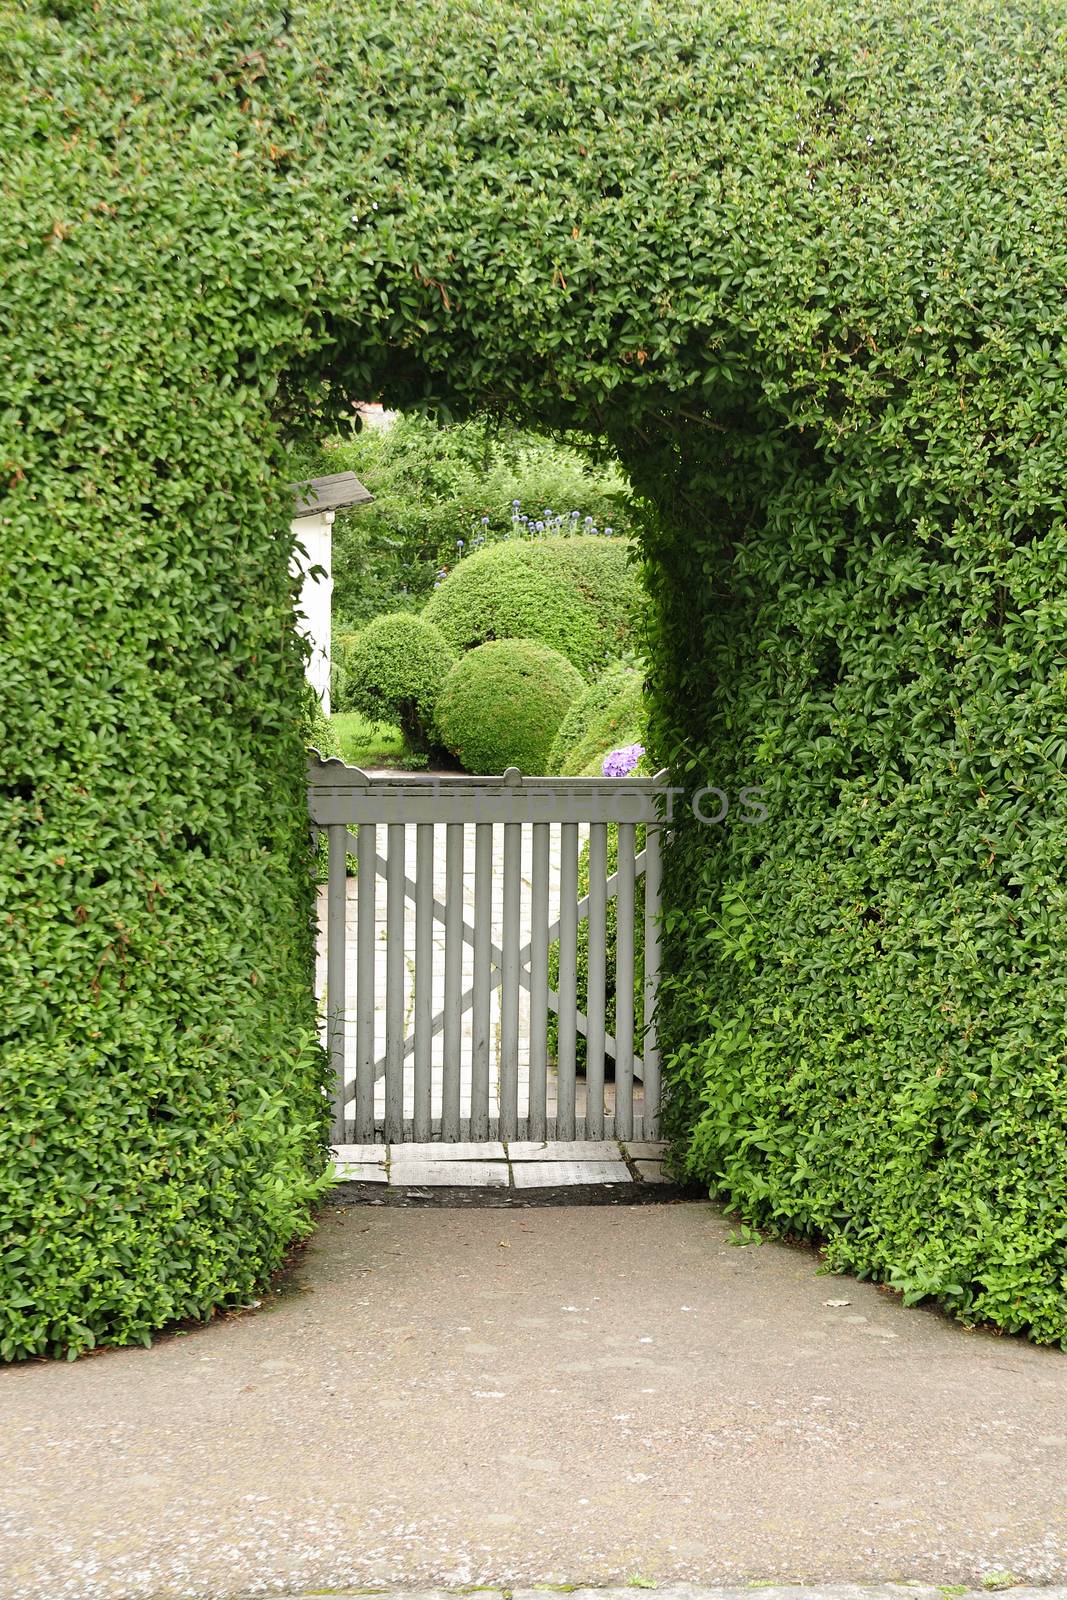 Green hedge cut in the shape of an arch over a small wooden gate